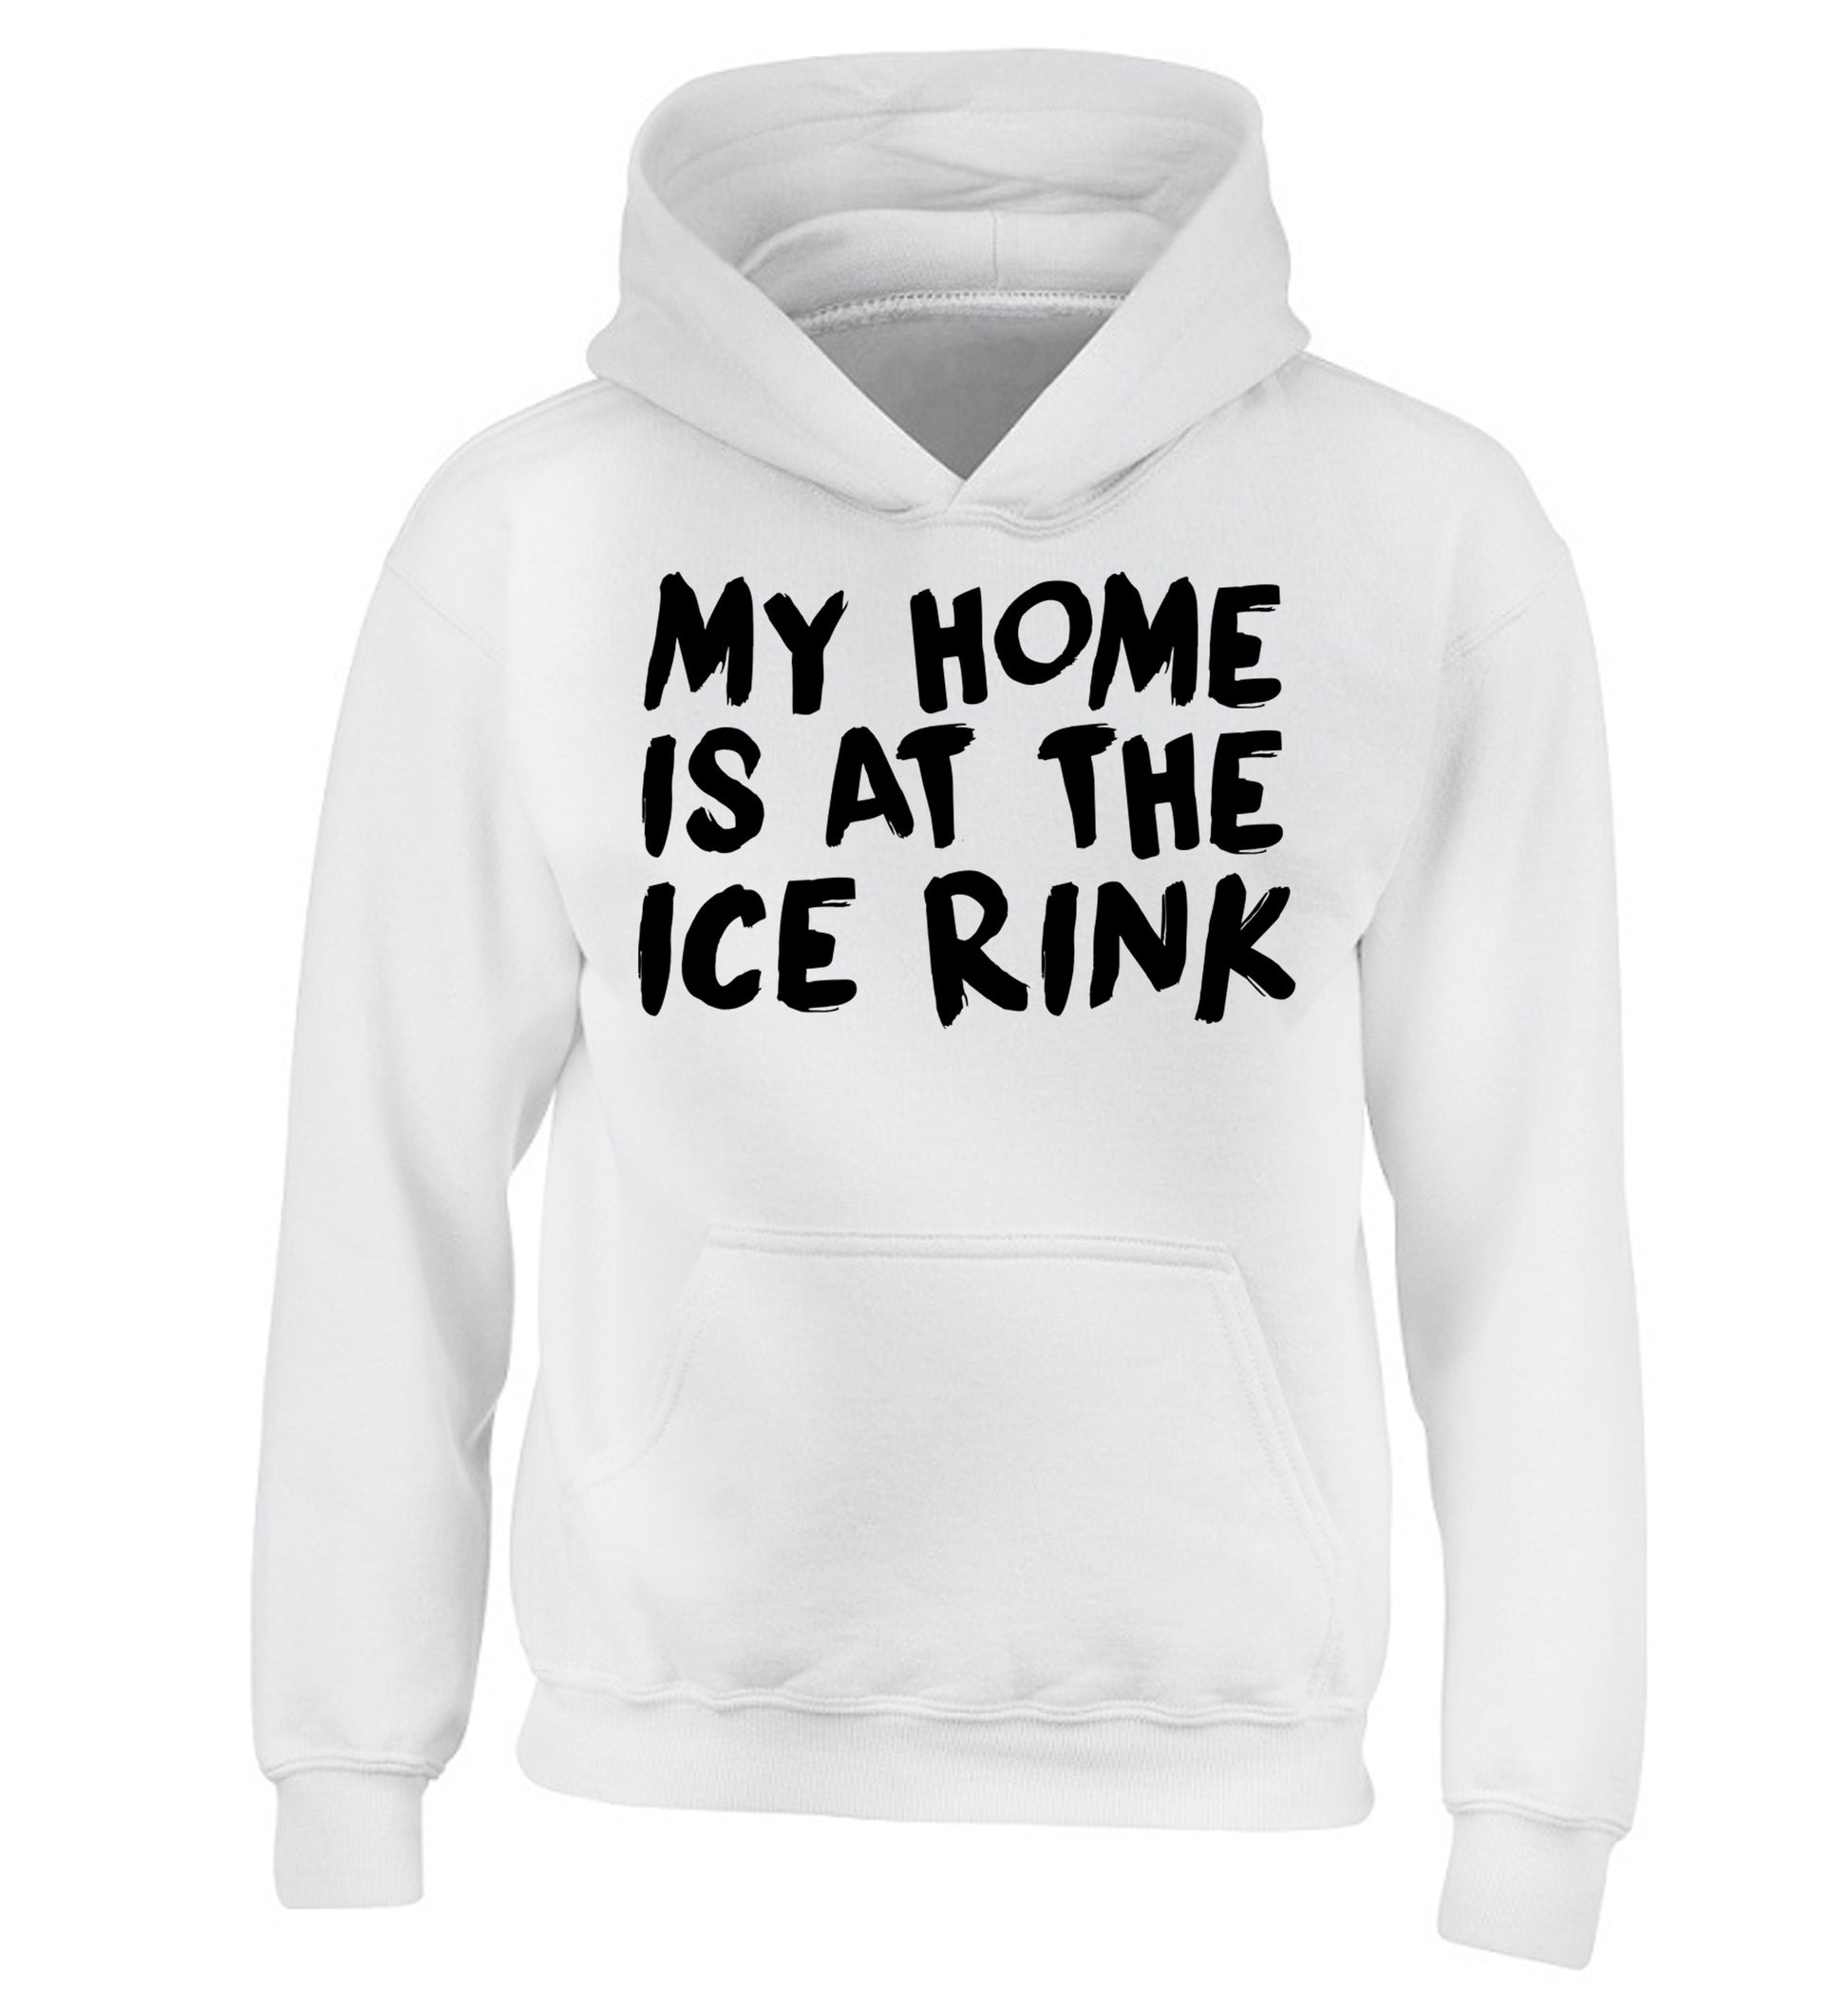 My home is at the ice rink children's white hoodie 12-14 Years